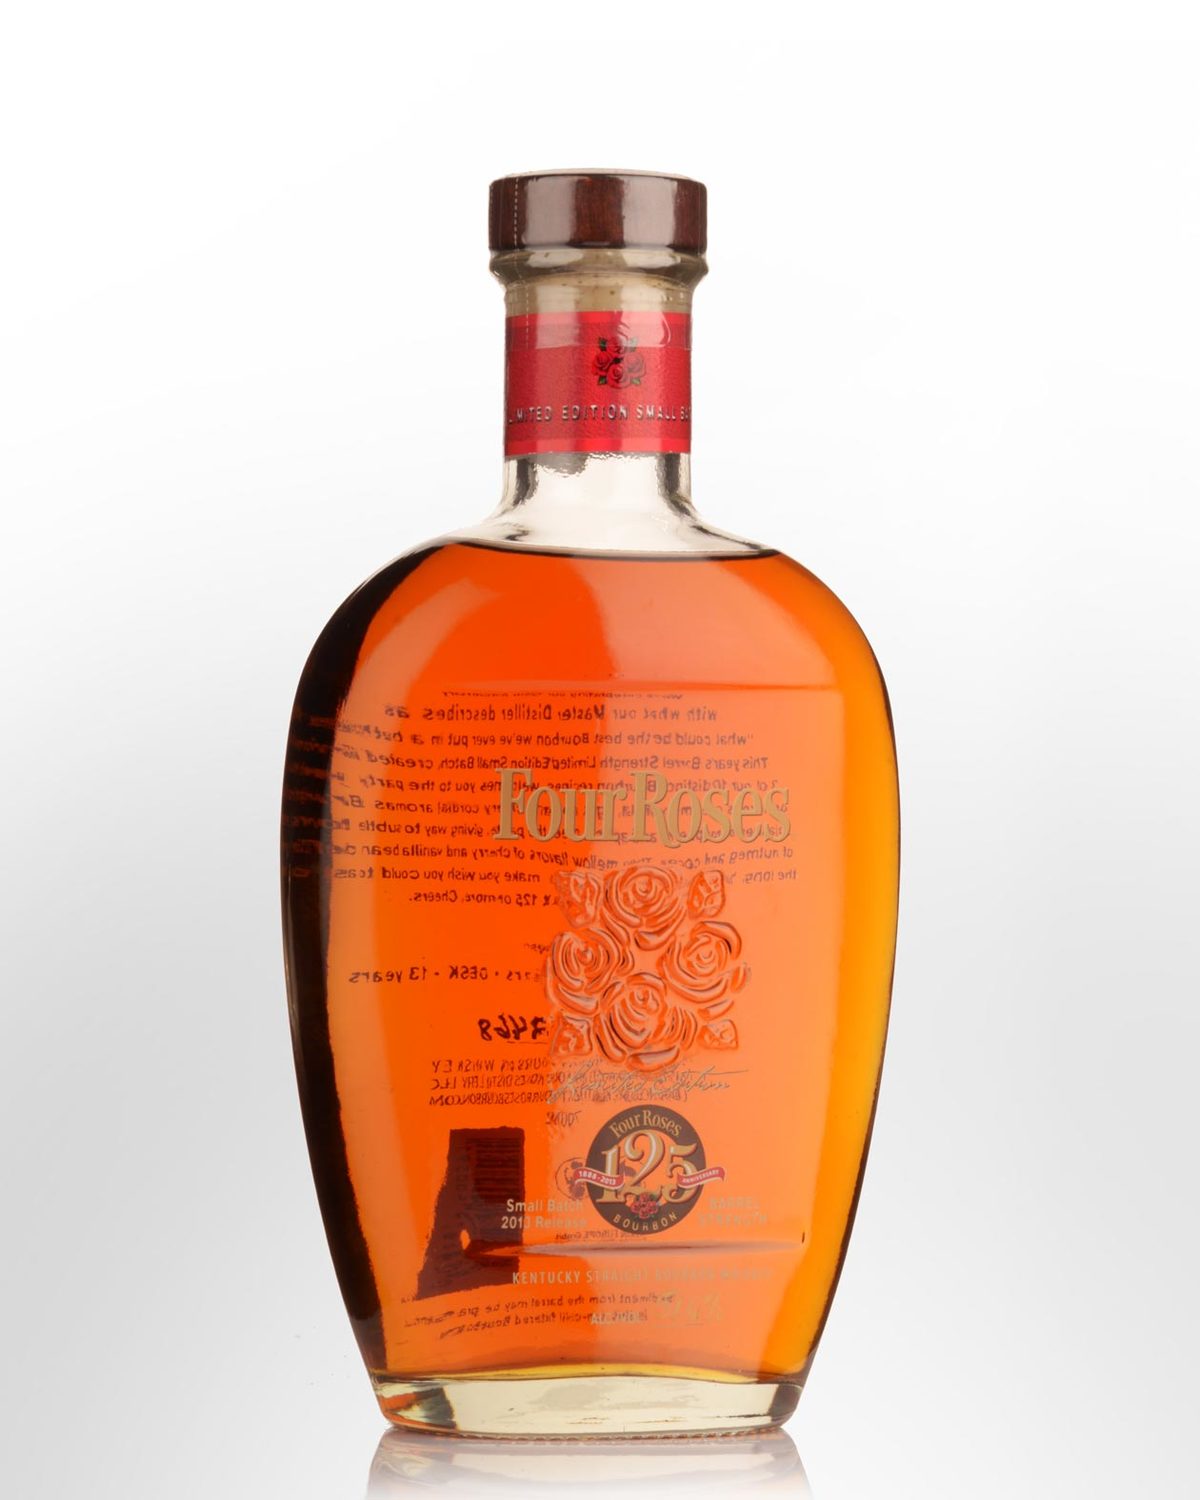 Four Roses 125th Anniversary Limited Edition Cask Strength Bourbon